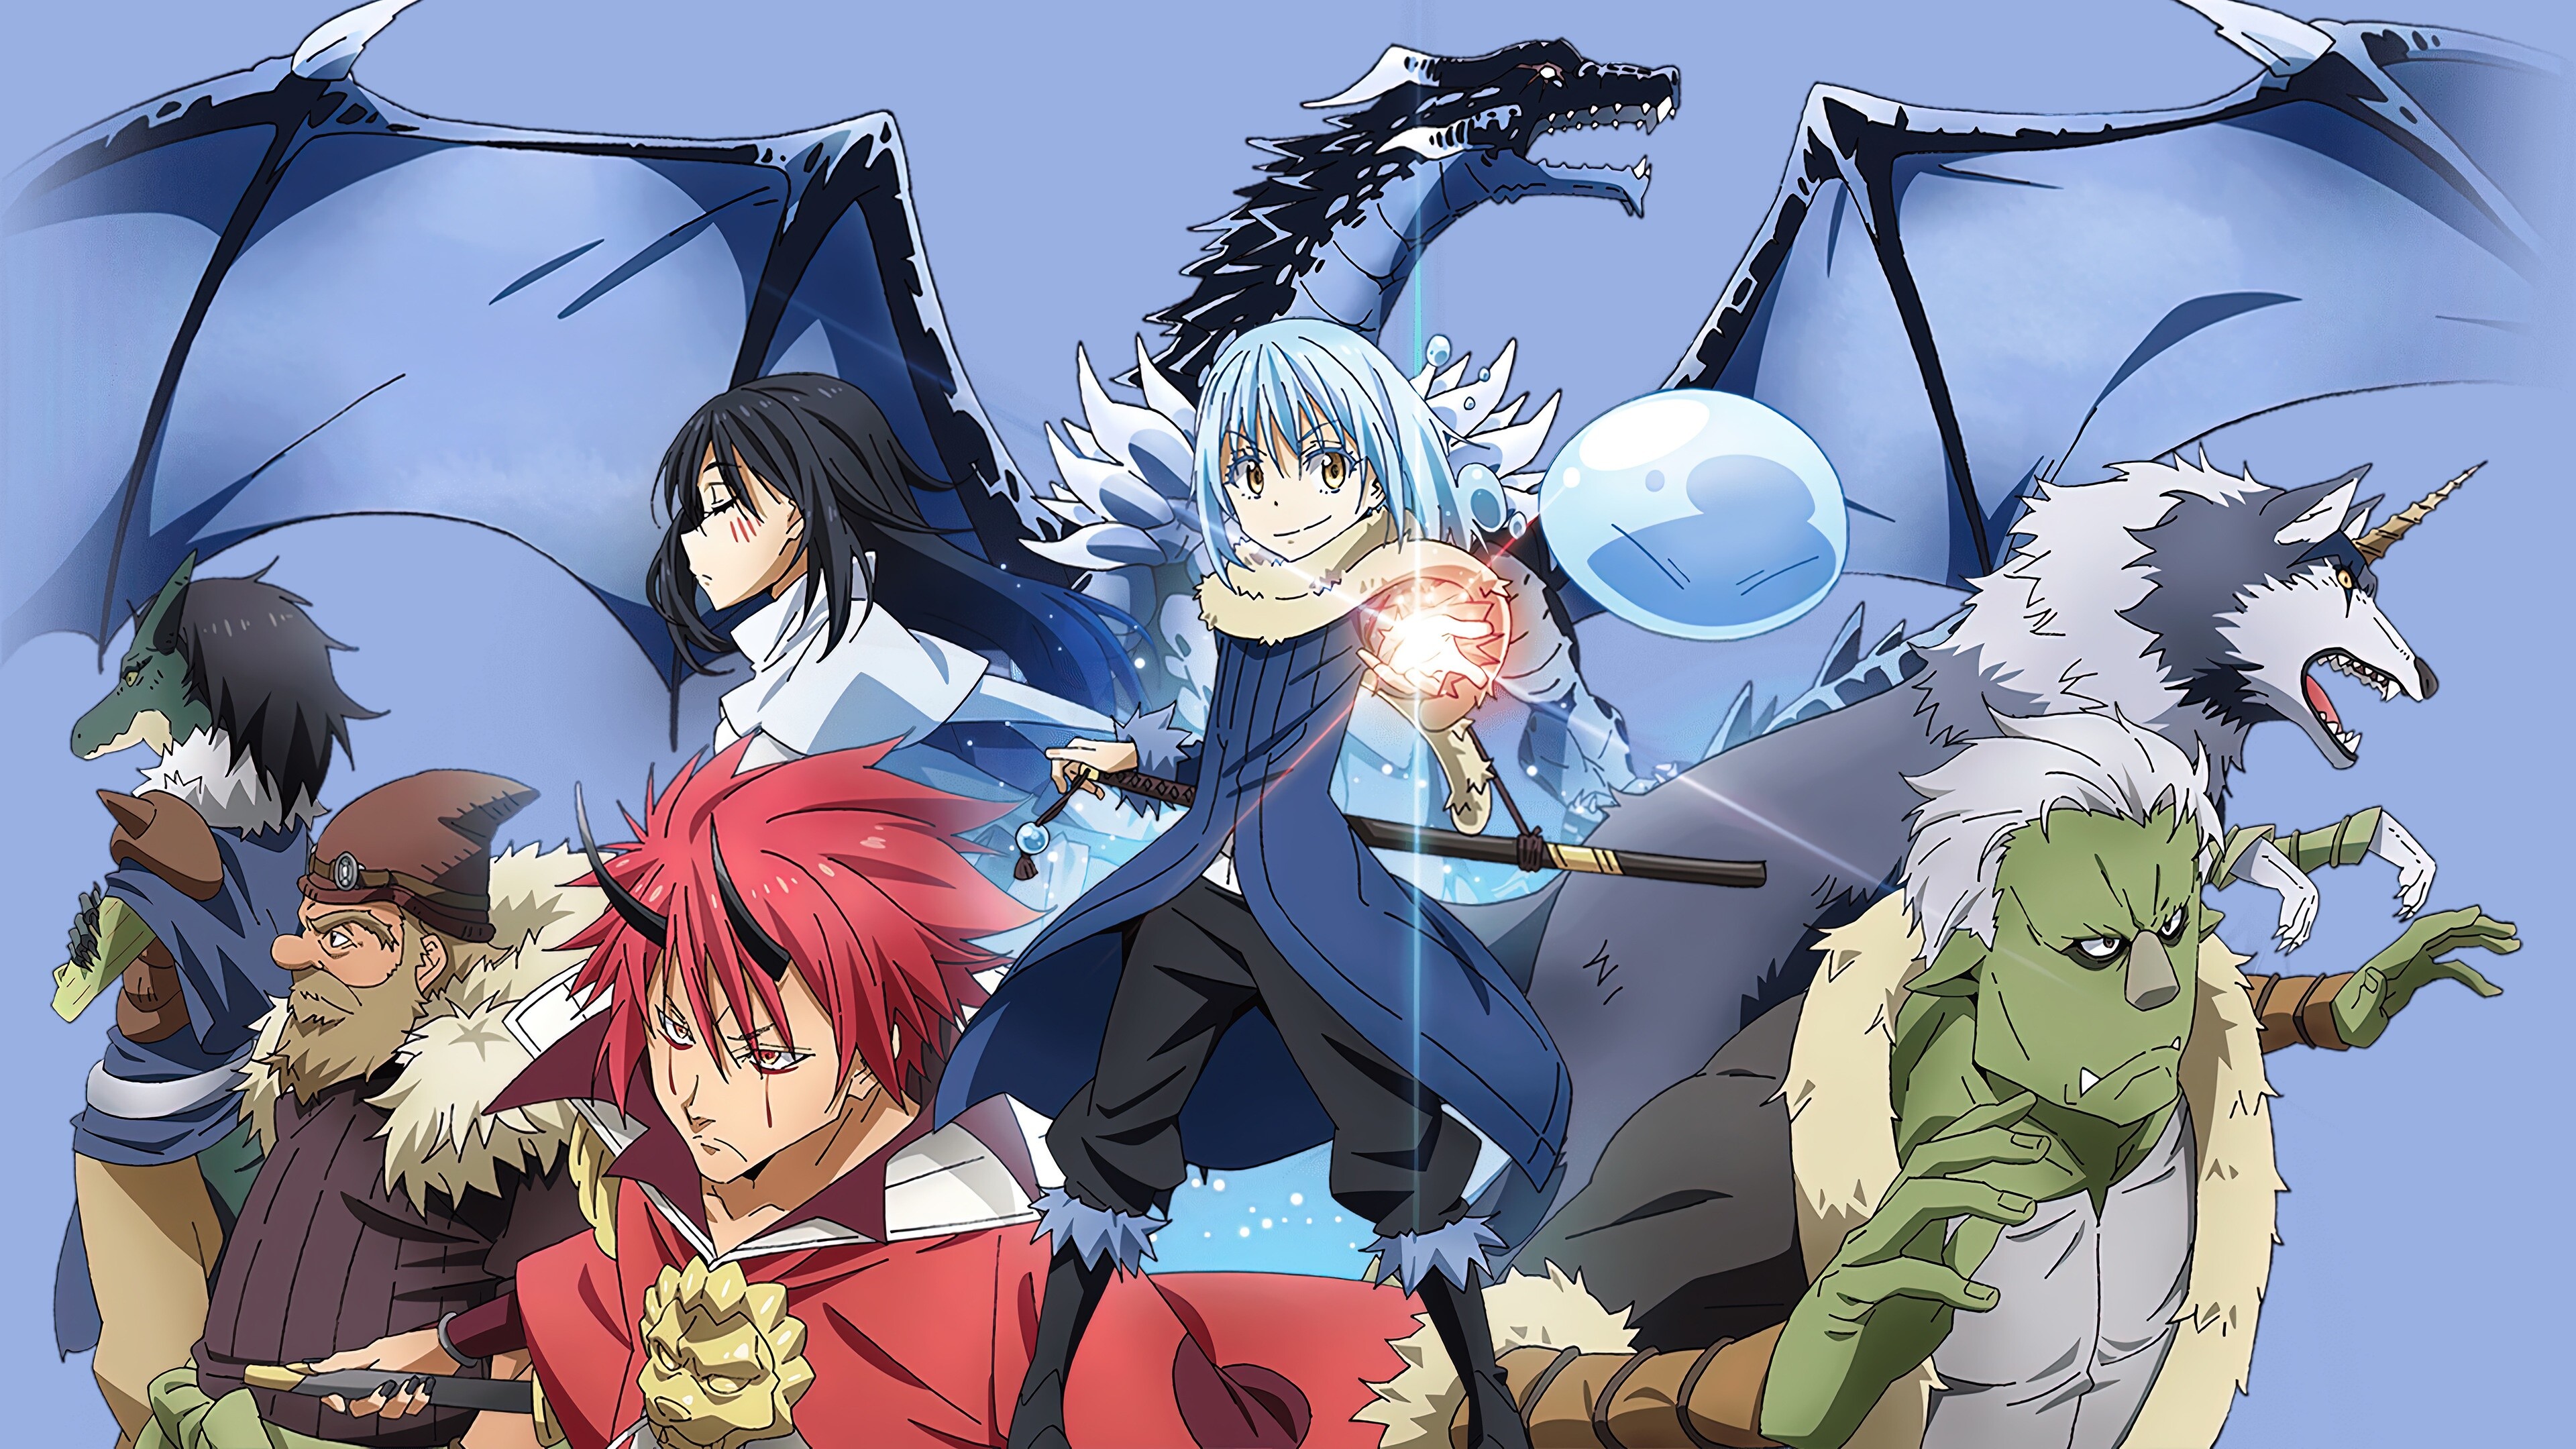 That Time I Got Reincarnated as a Slime: A salaryman who is murdered and reincarnates in a sword and sorcery world as a slime with unique powers, Fantasy. 3840x2160 4K Wallpaper.